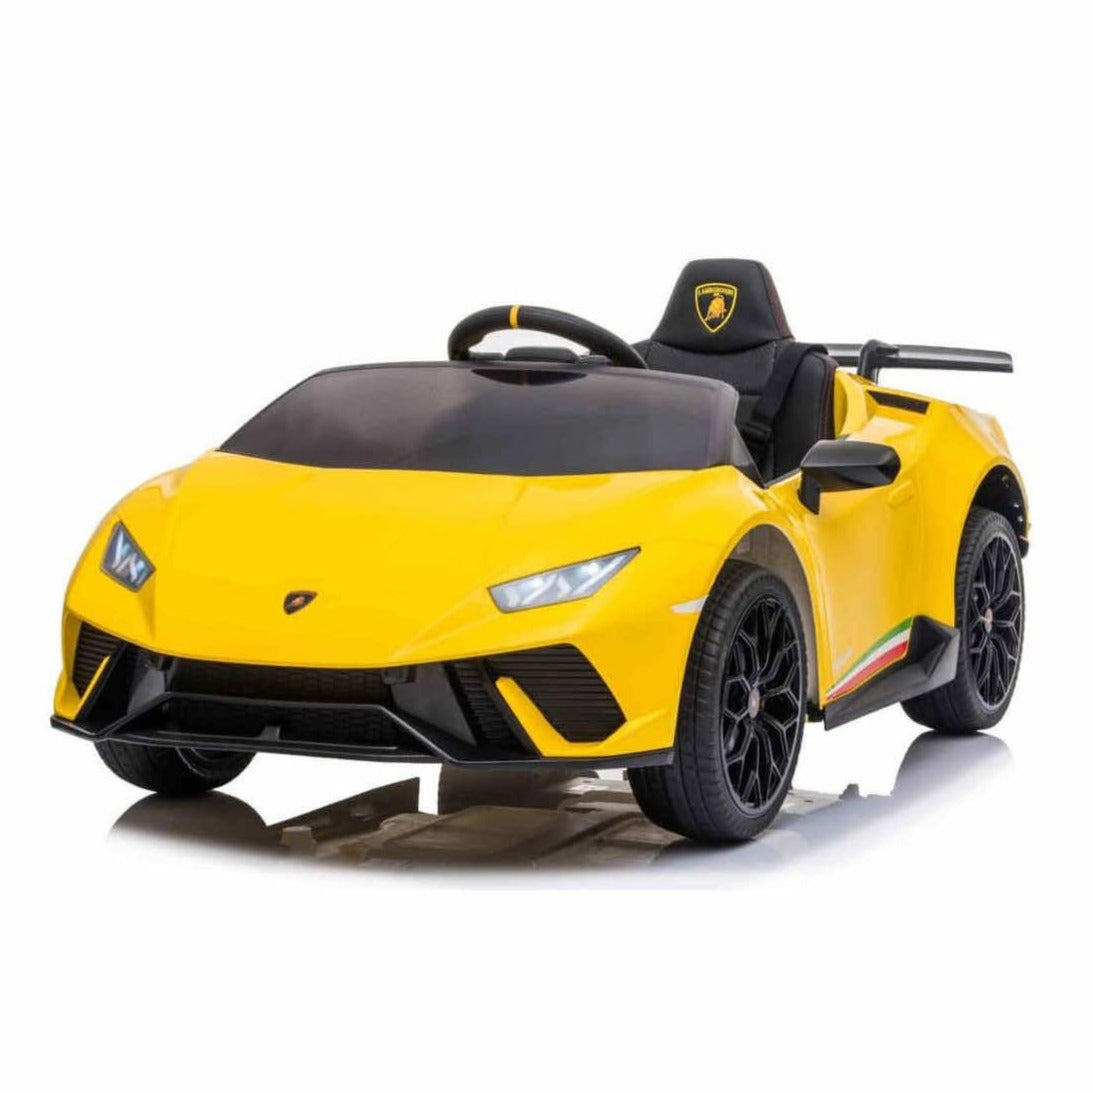 12V Lamborghini Huracan 4X4 Kids Electric Ride On Car with Remote Control Kids Cars CA - Ride On Toys Store